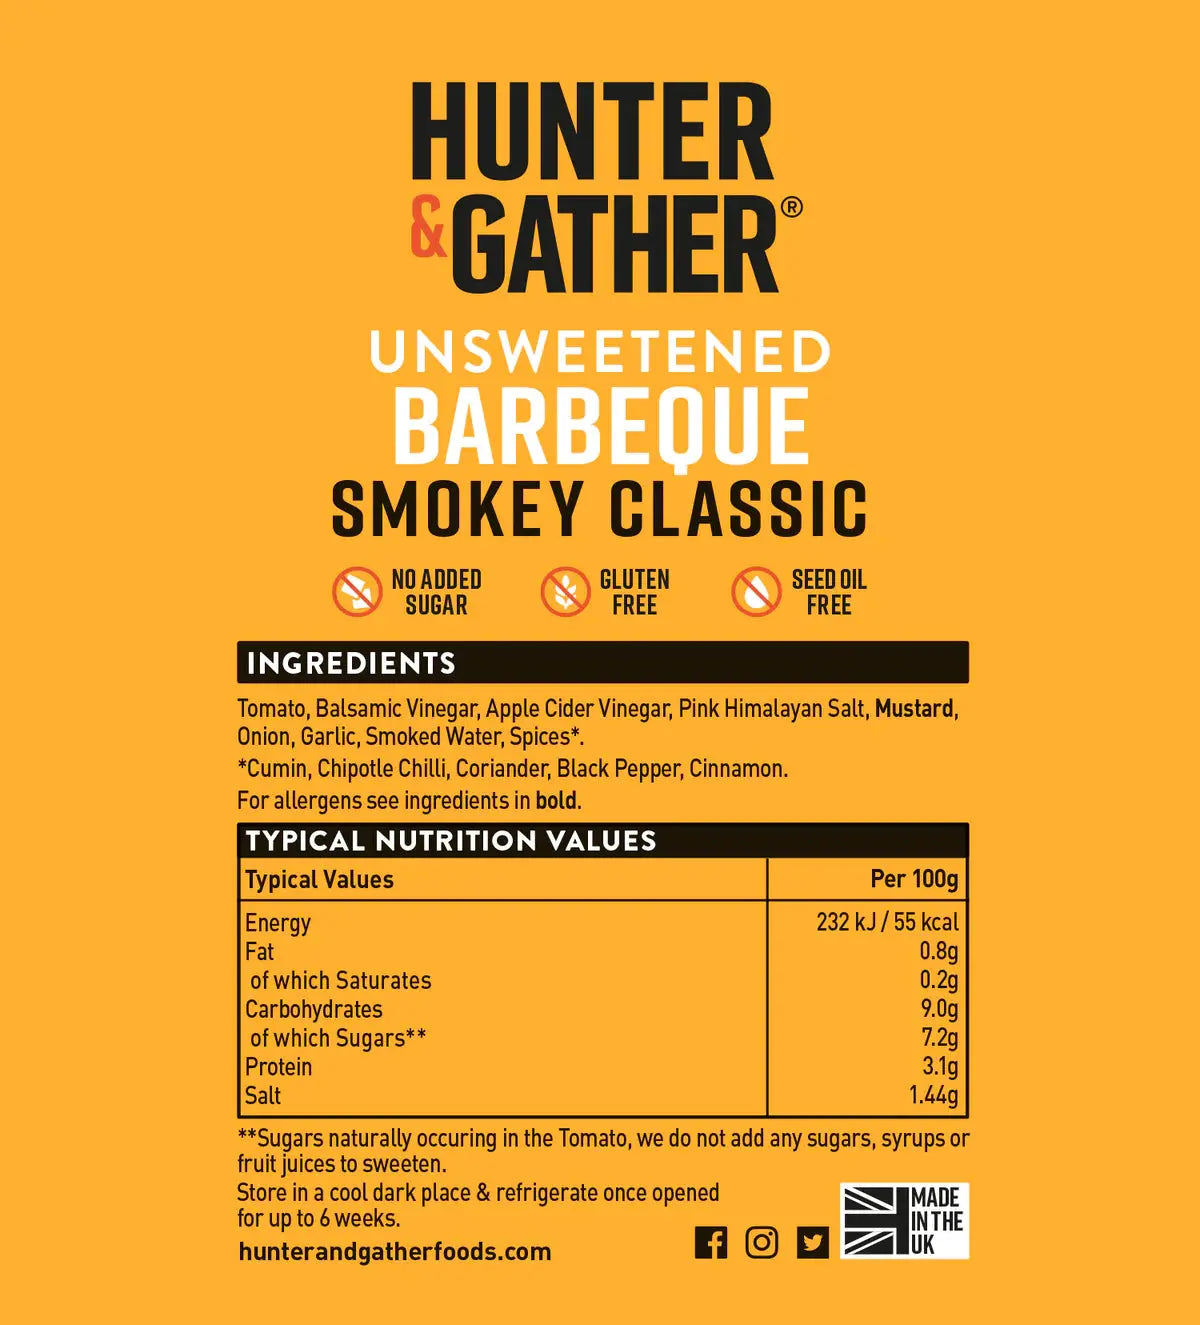 Hunter & Gather Smokey Barbecue Squeezy 350g